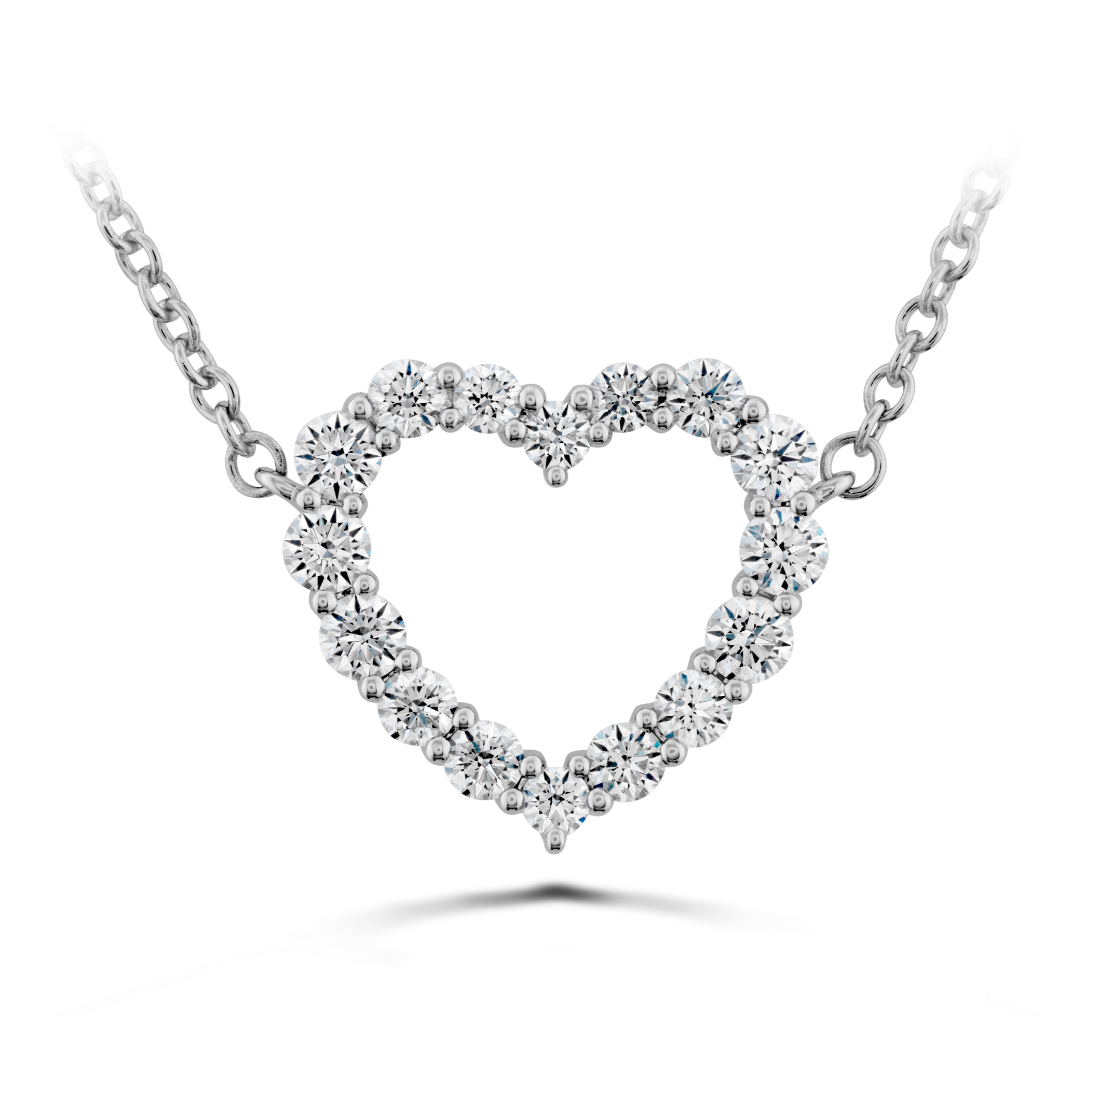 Hearts on Fire 18K White Gold Signature Heart Pendant Necklace